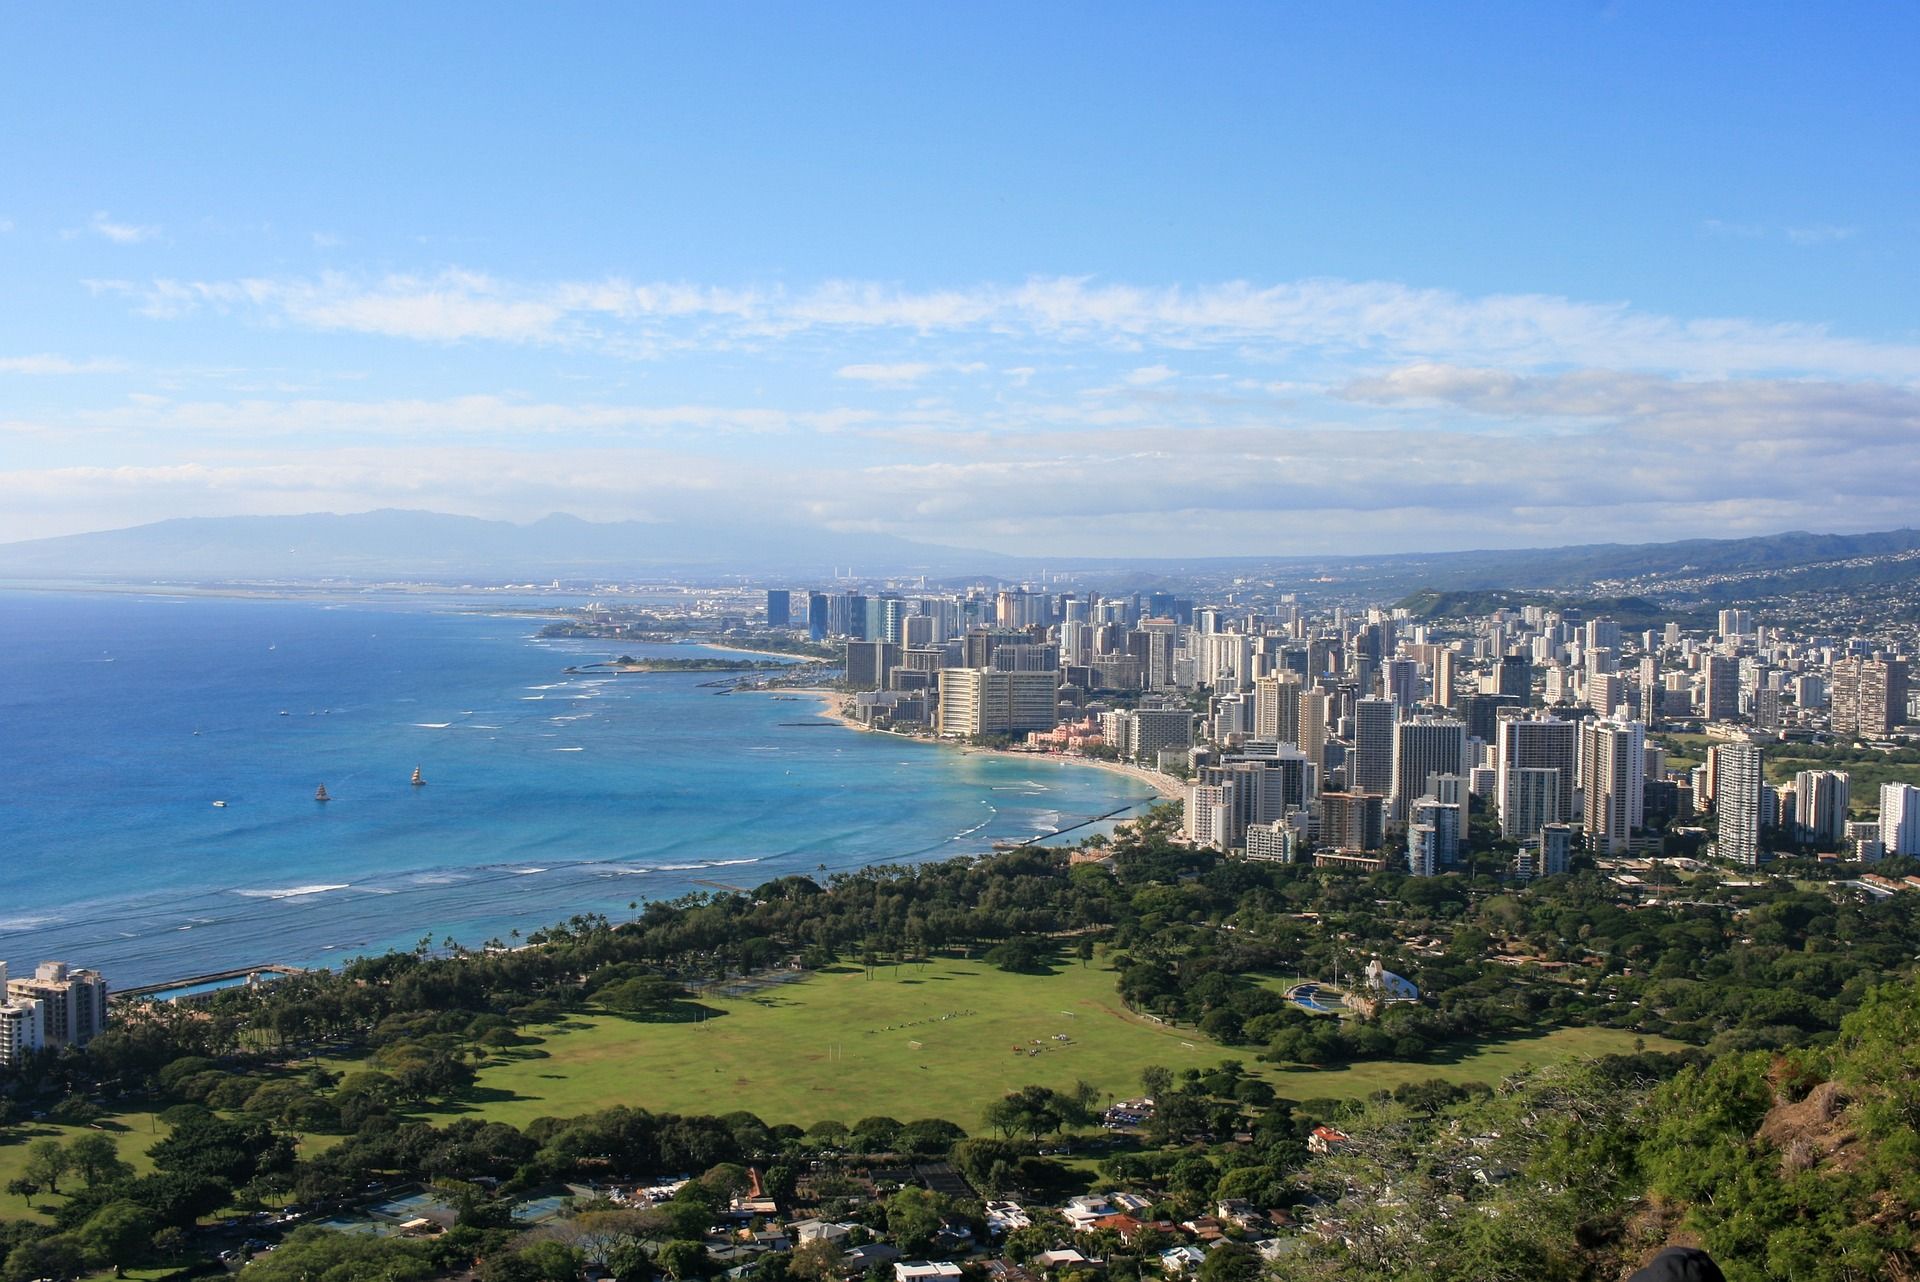 Aerial view of the city of Honolulu, Hawaii daytime